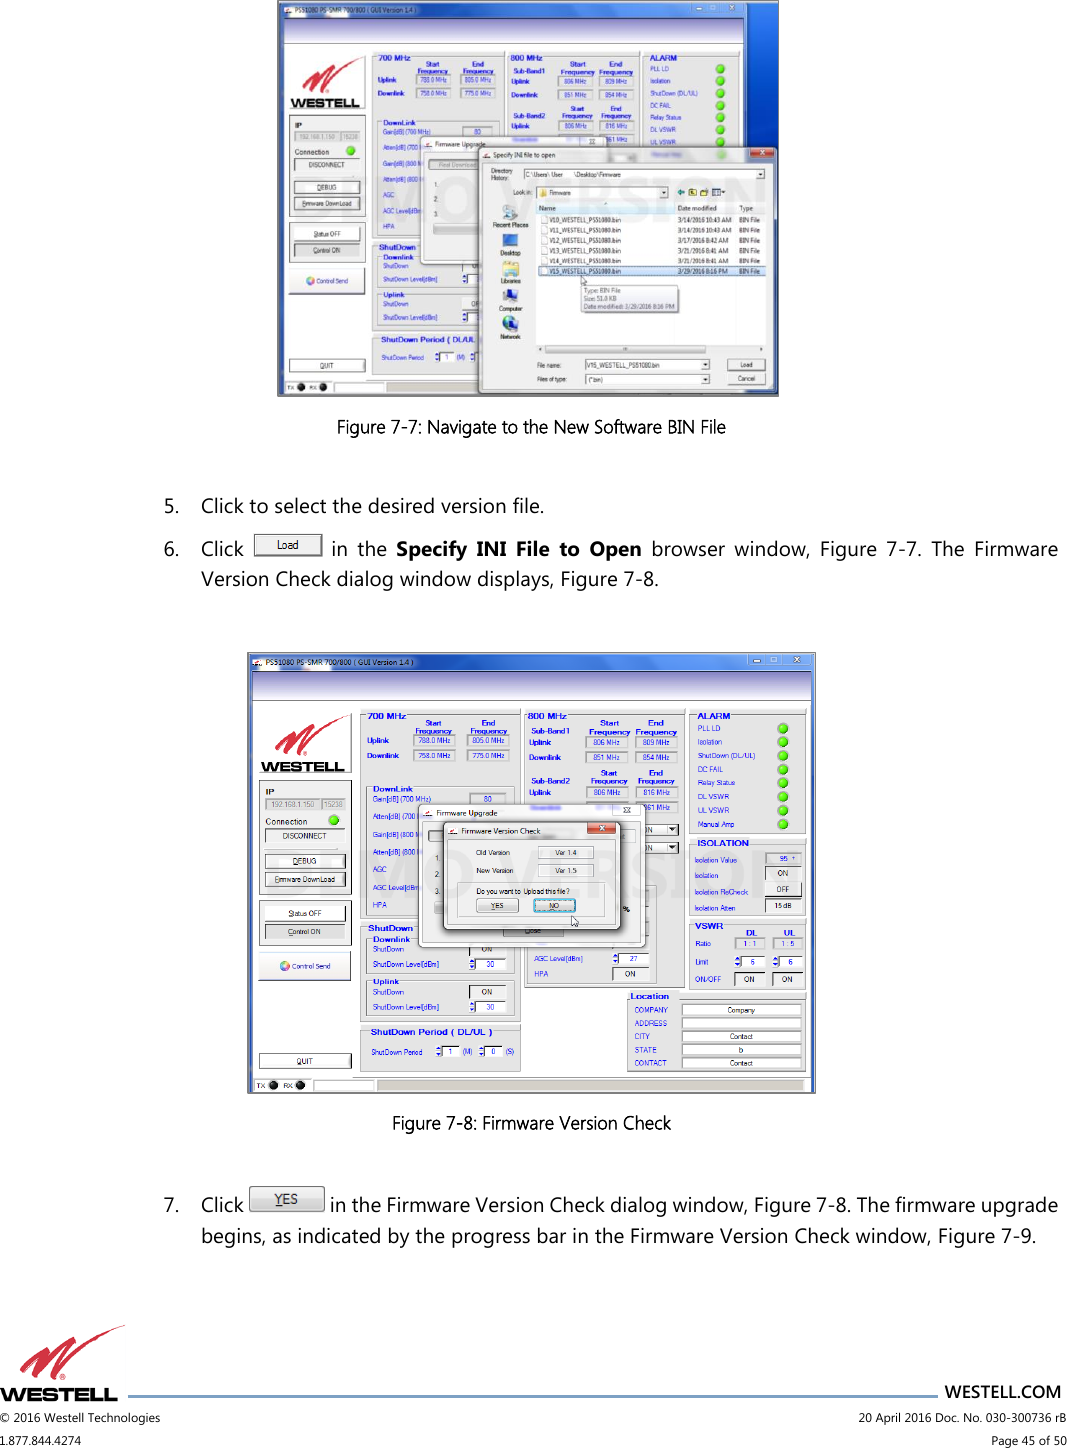                      WESTELL.COM © 2016 Westell Technologies                             20 April 2016 Doc. No. 030-300736 rB 1.877.844.4274                             Page 45 of 50   Figure 7-7: Navigate to the New Software BIN File  5. Click to select the desired version file. 6. Click    in  the  Specify  INI  File  to  Open  browser  window,  Figure  7-7.  The  Firmware Version Check dialog window displays, Figure 7-8.   Figure 7-8: Firmware Version Check  7. Click   in the Firmware Version Check dialog window, Figure 7-8. The firmware upgrade begins, as indicated by the progress bar in the Firmware Version Check window, Figure 7-9. 